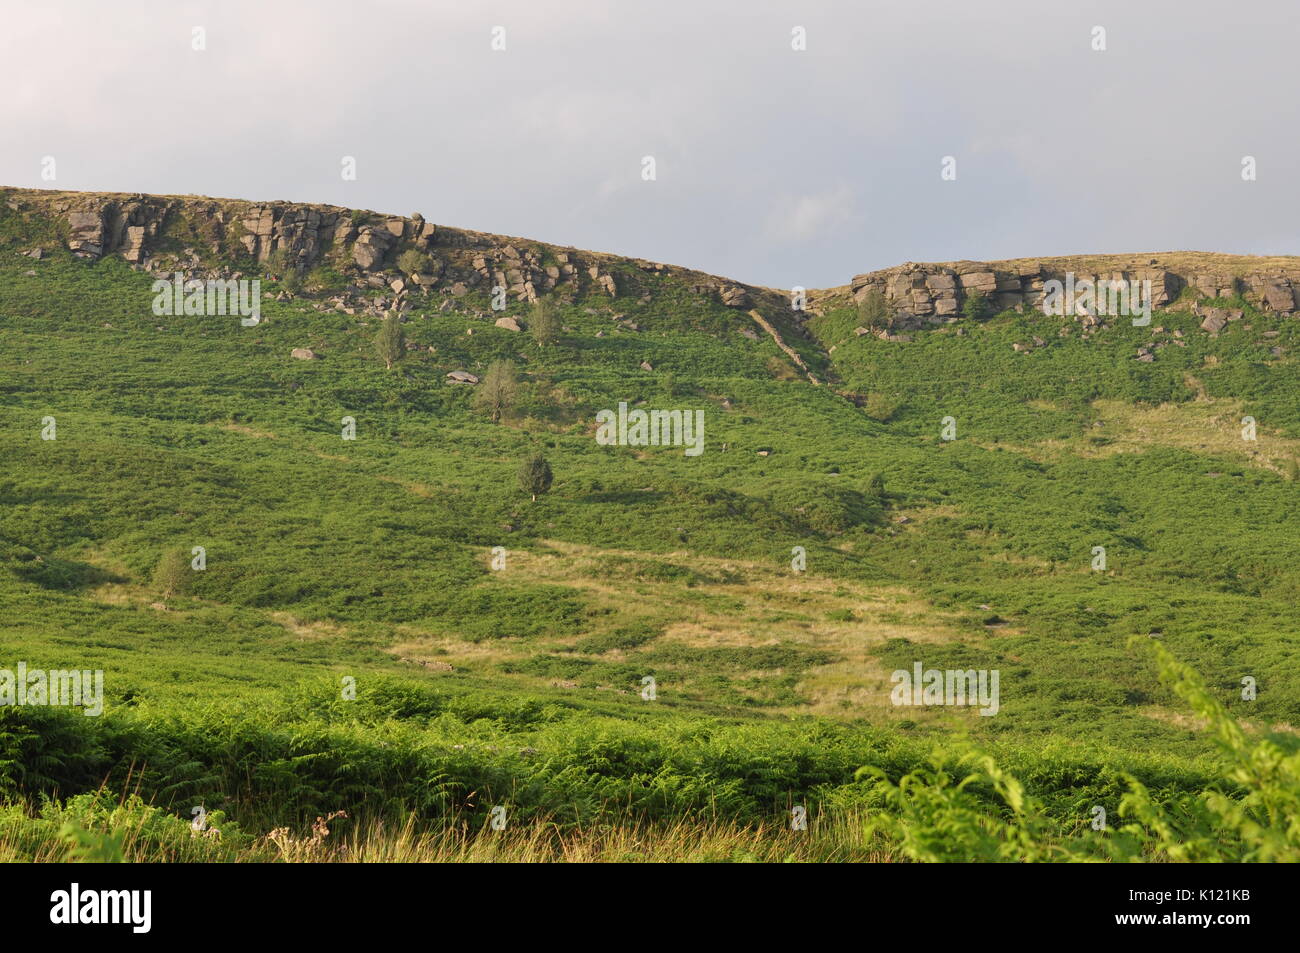 Stanage Edge, a popular climbing and walking location in Derbyshire Peak District, England UK Stock Photo